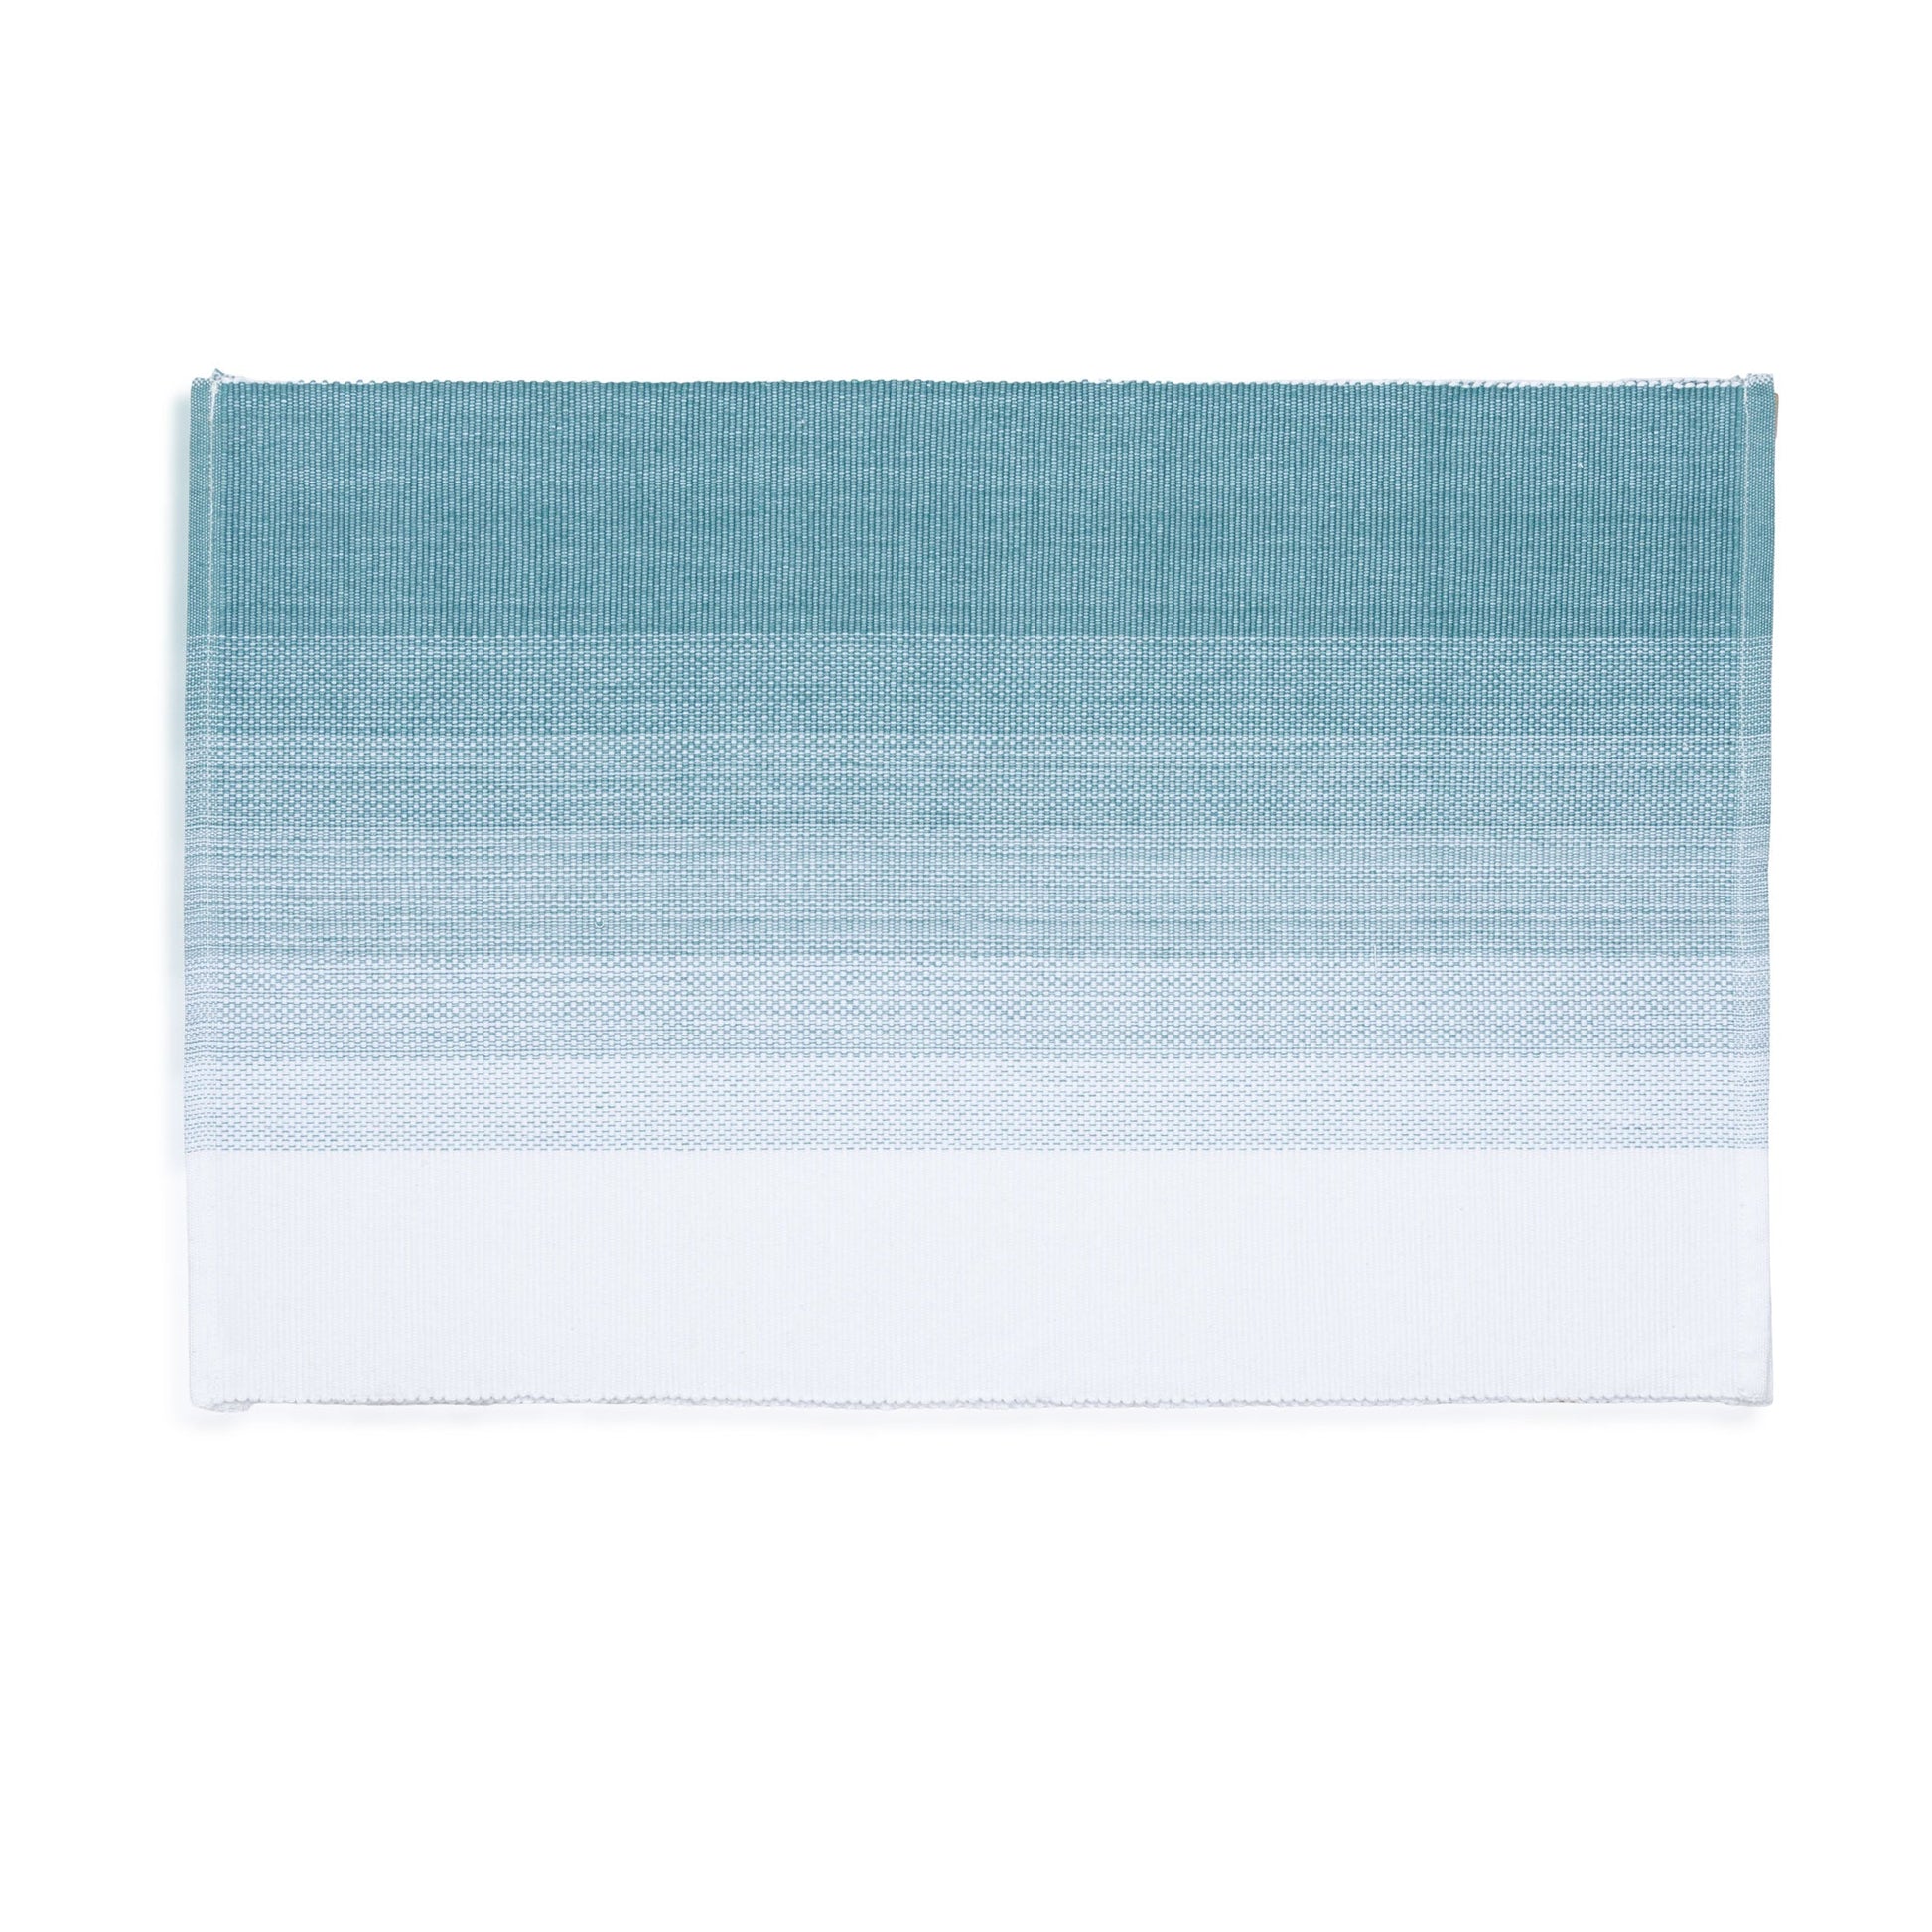 Teal Ombre Woven Placemat